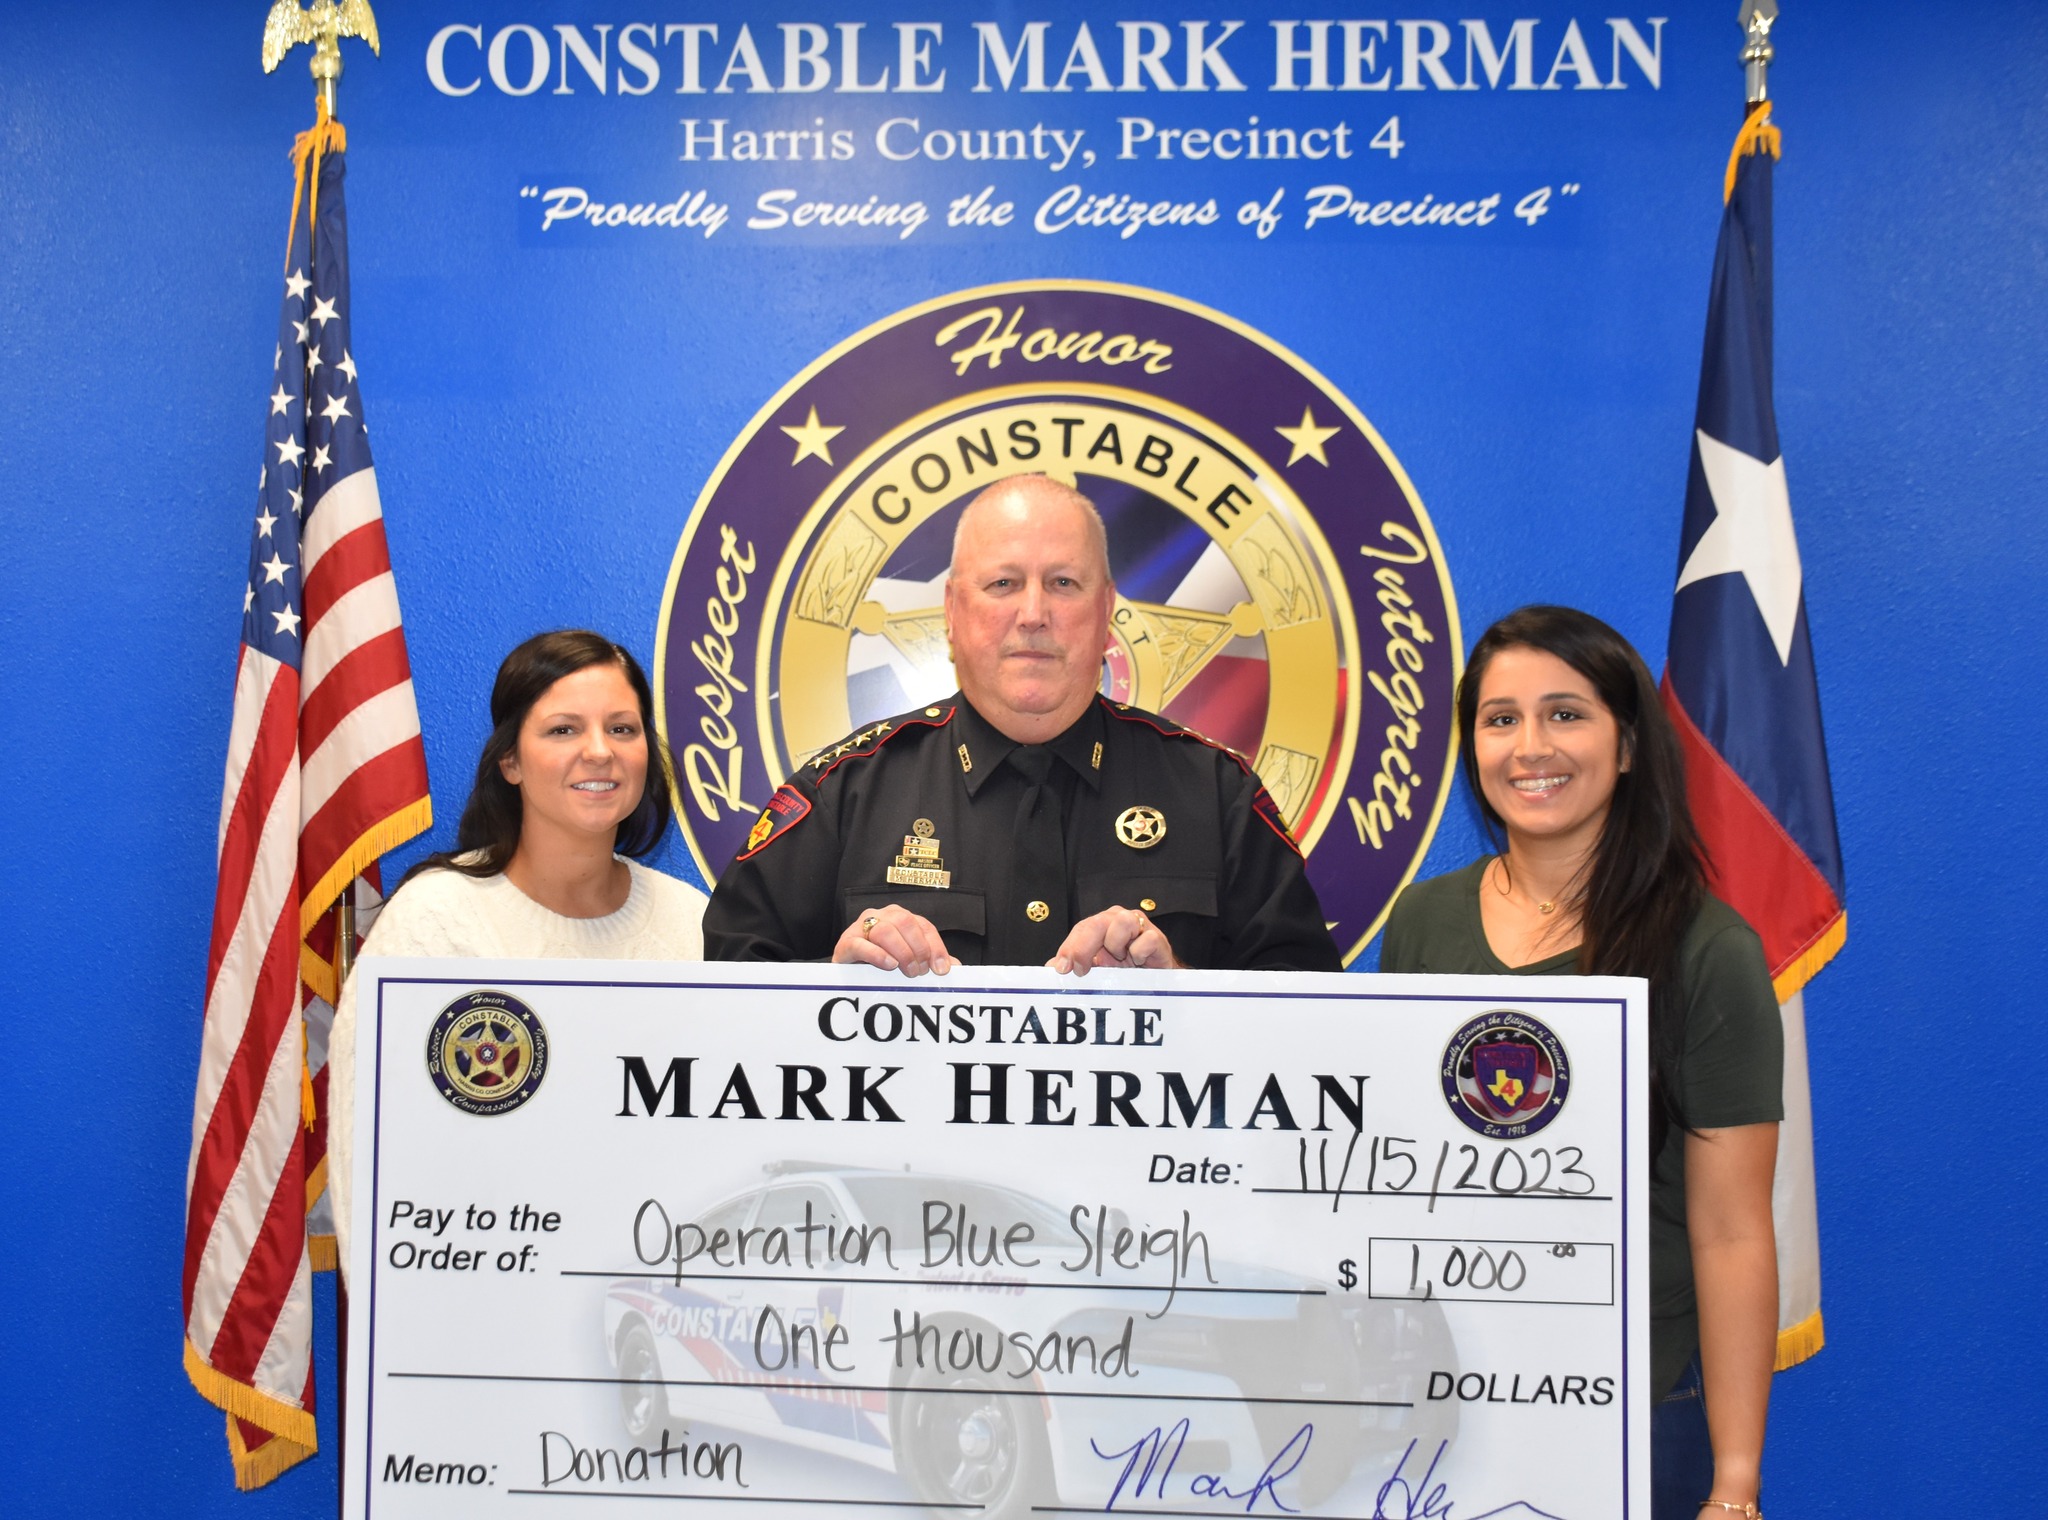 Constable Mark Herman Makes Personal Donation of $1,000 to Local Children's Charity for Christmas